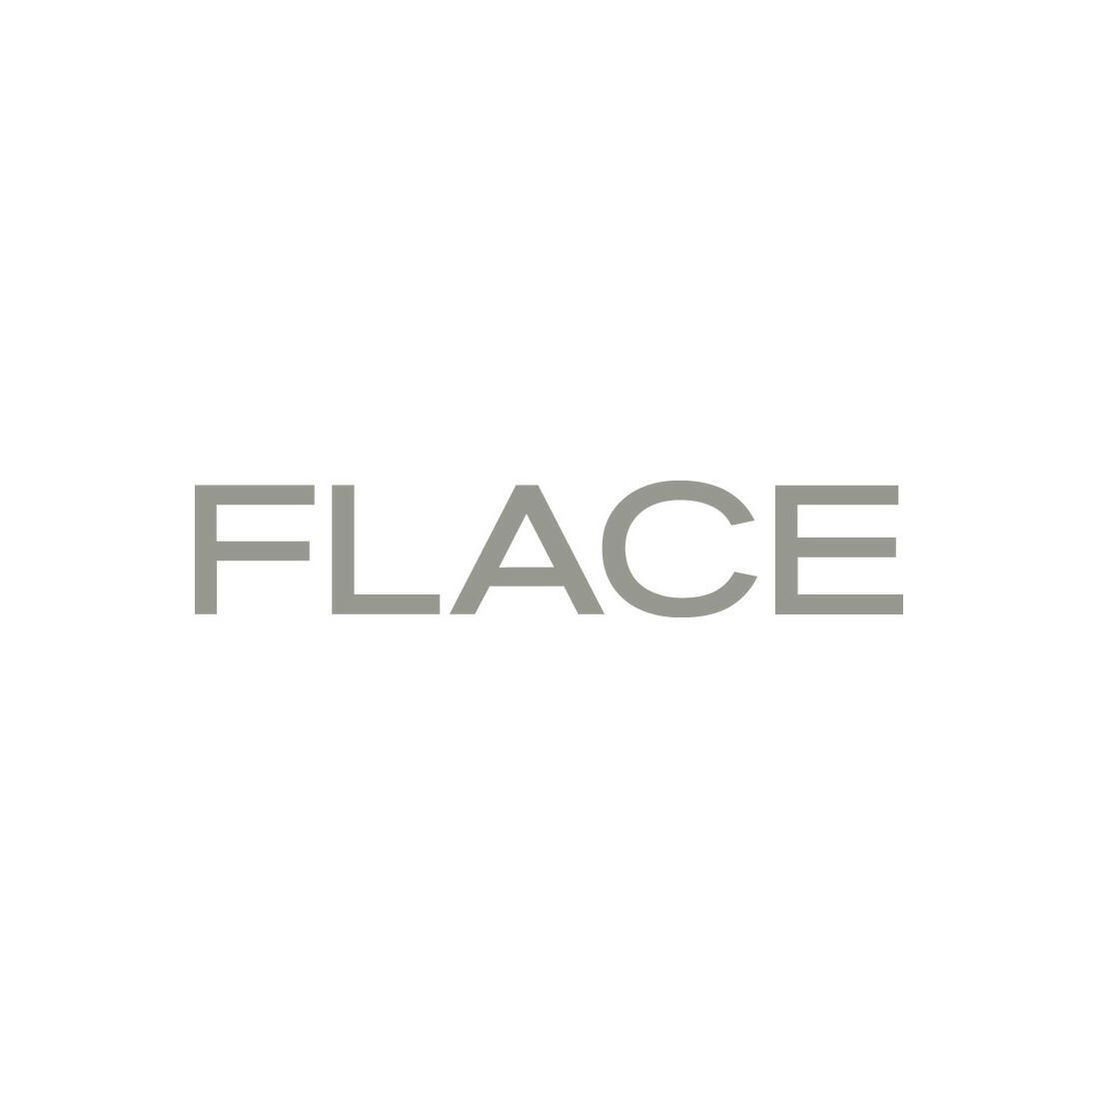 FLACE